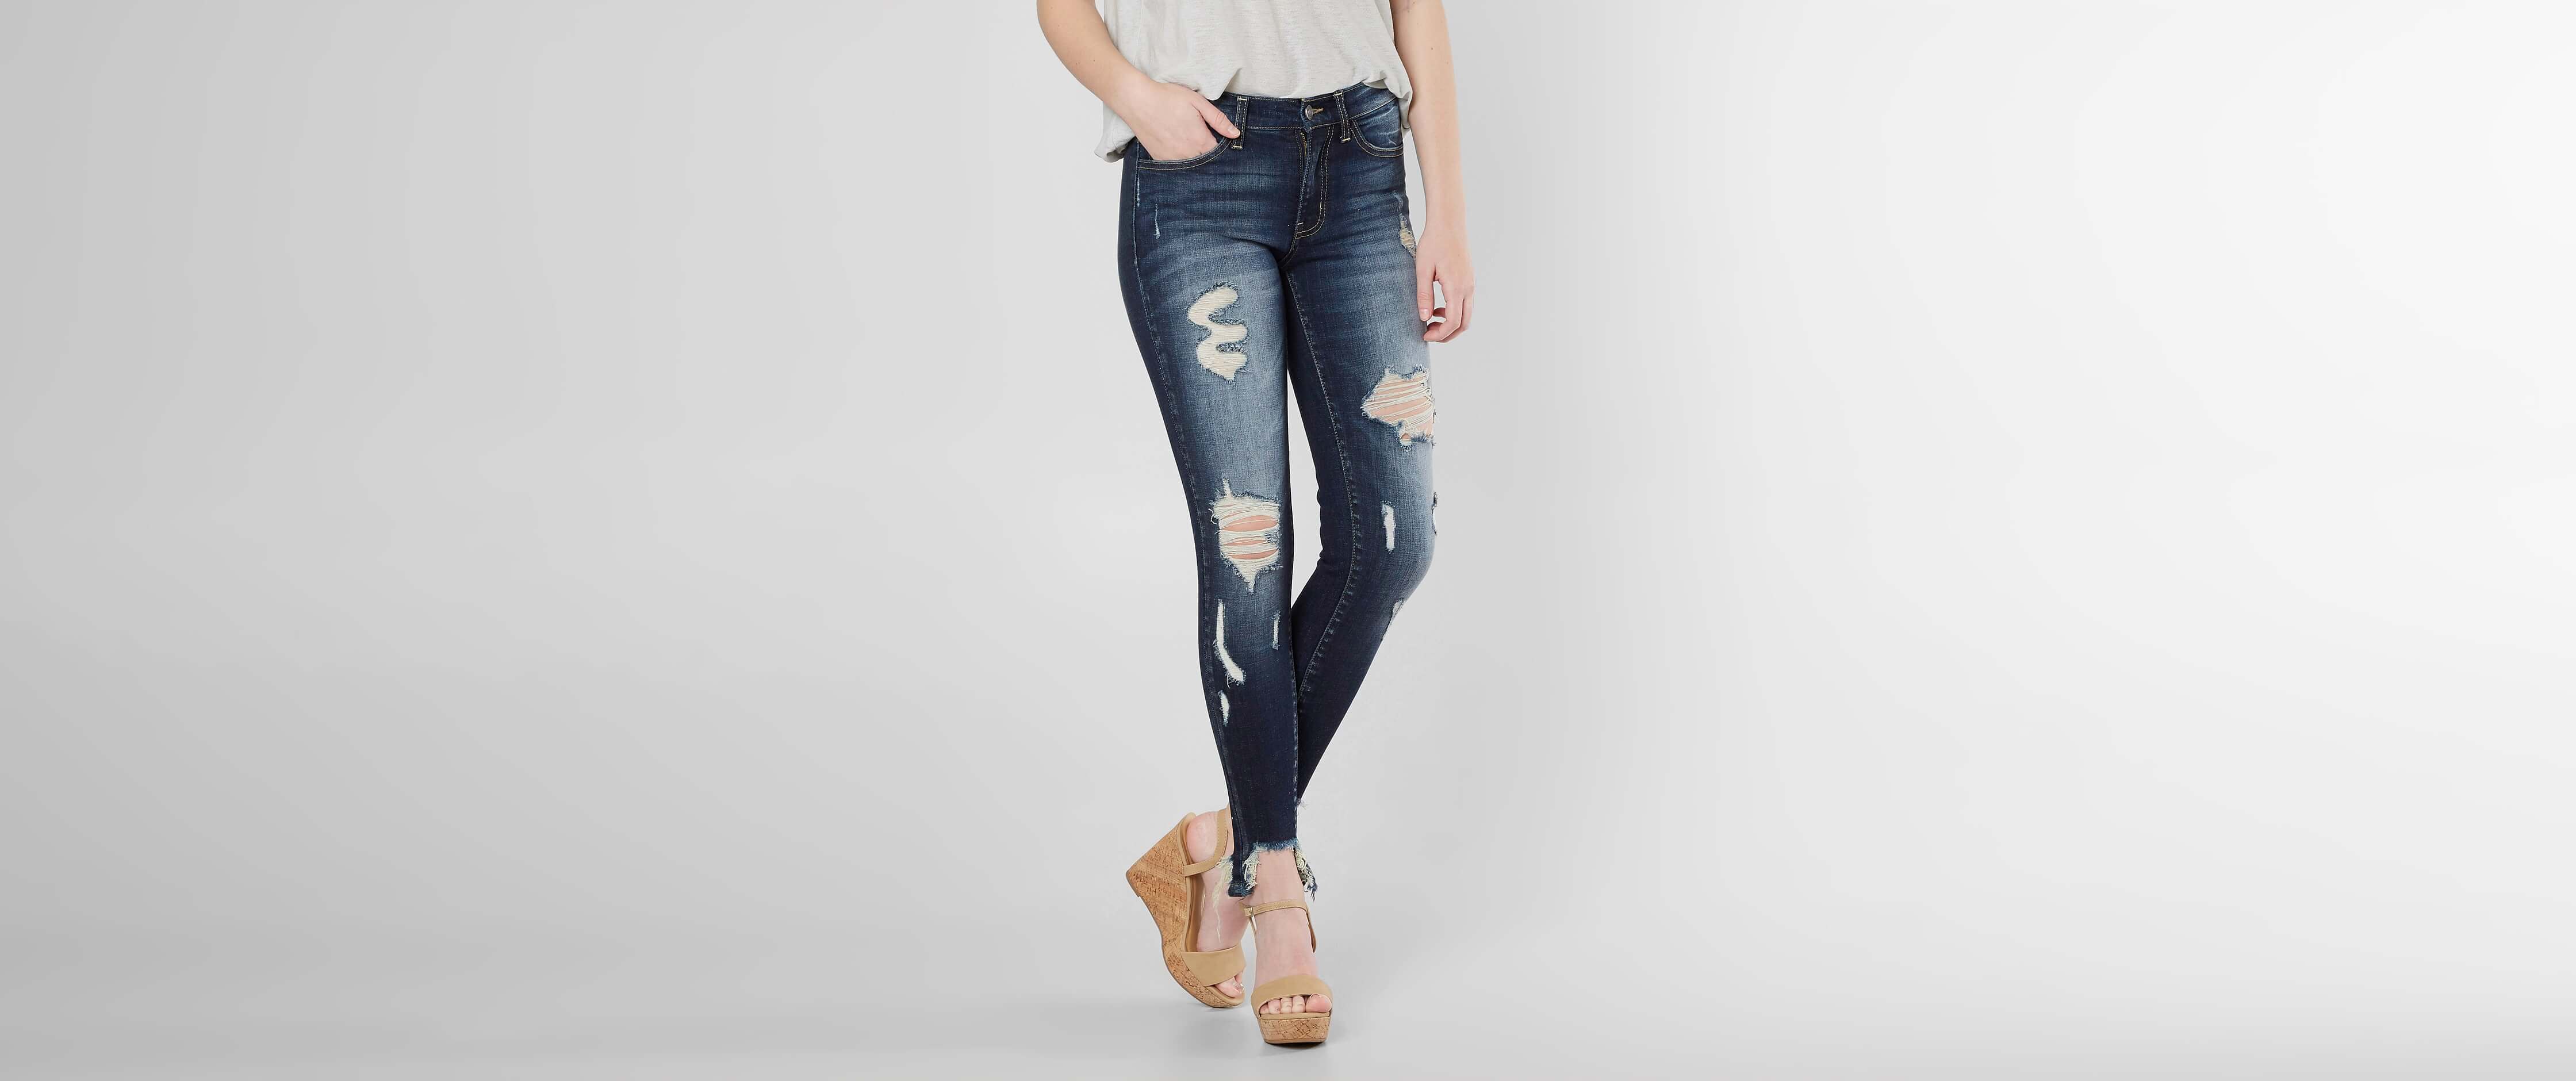 kancan jeans mid rise